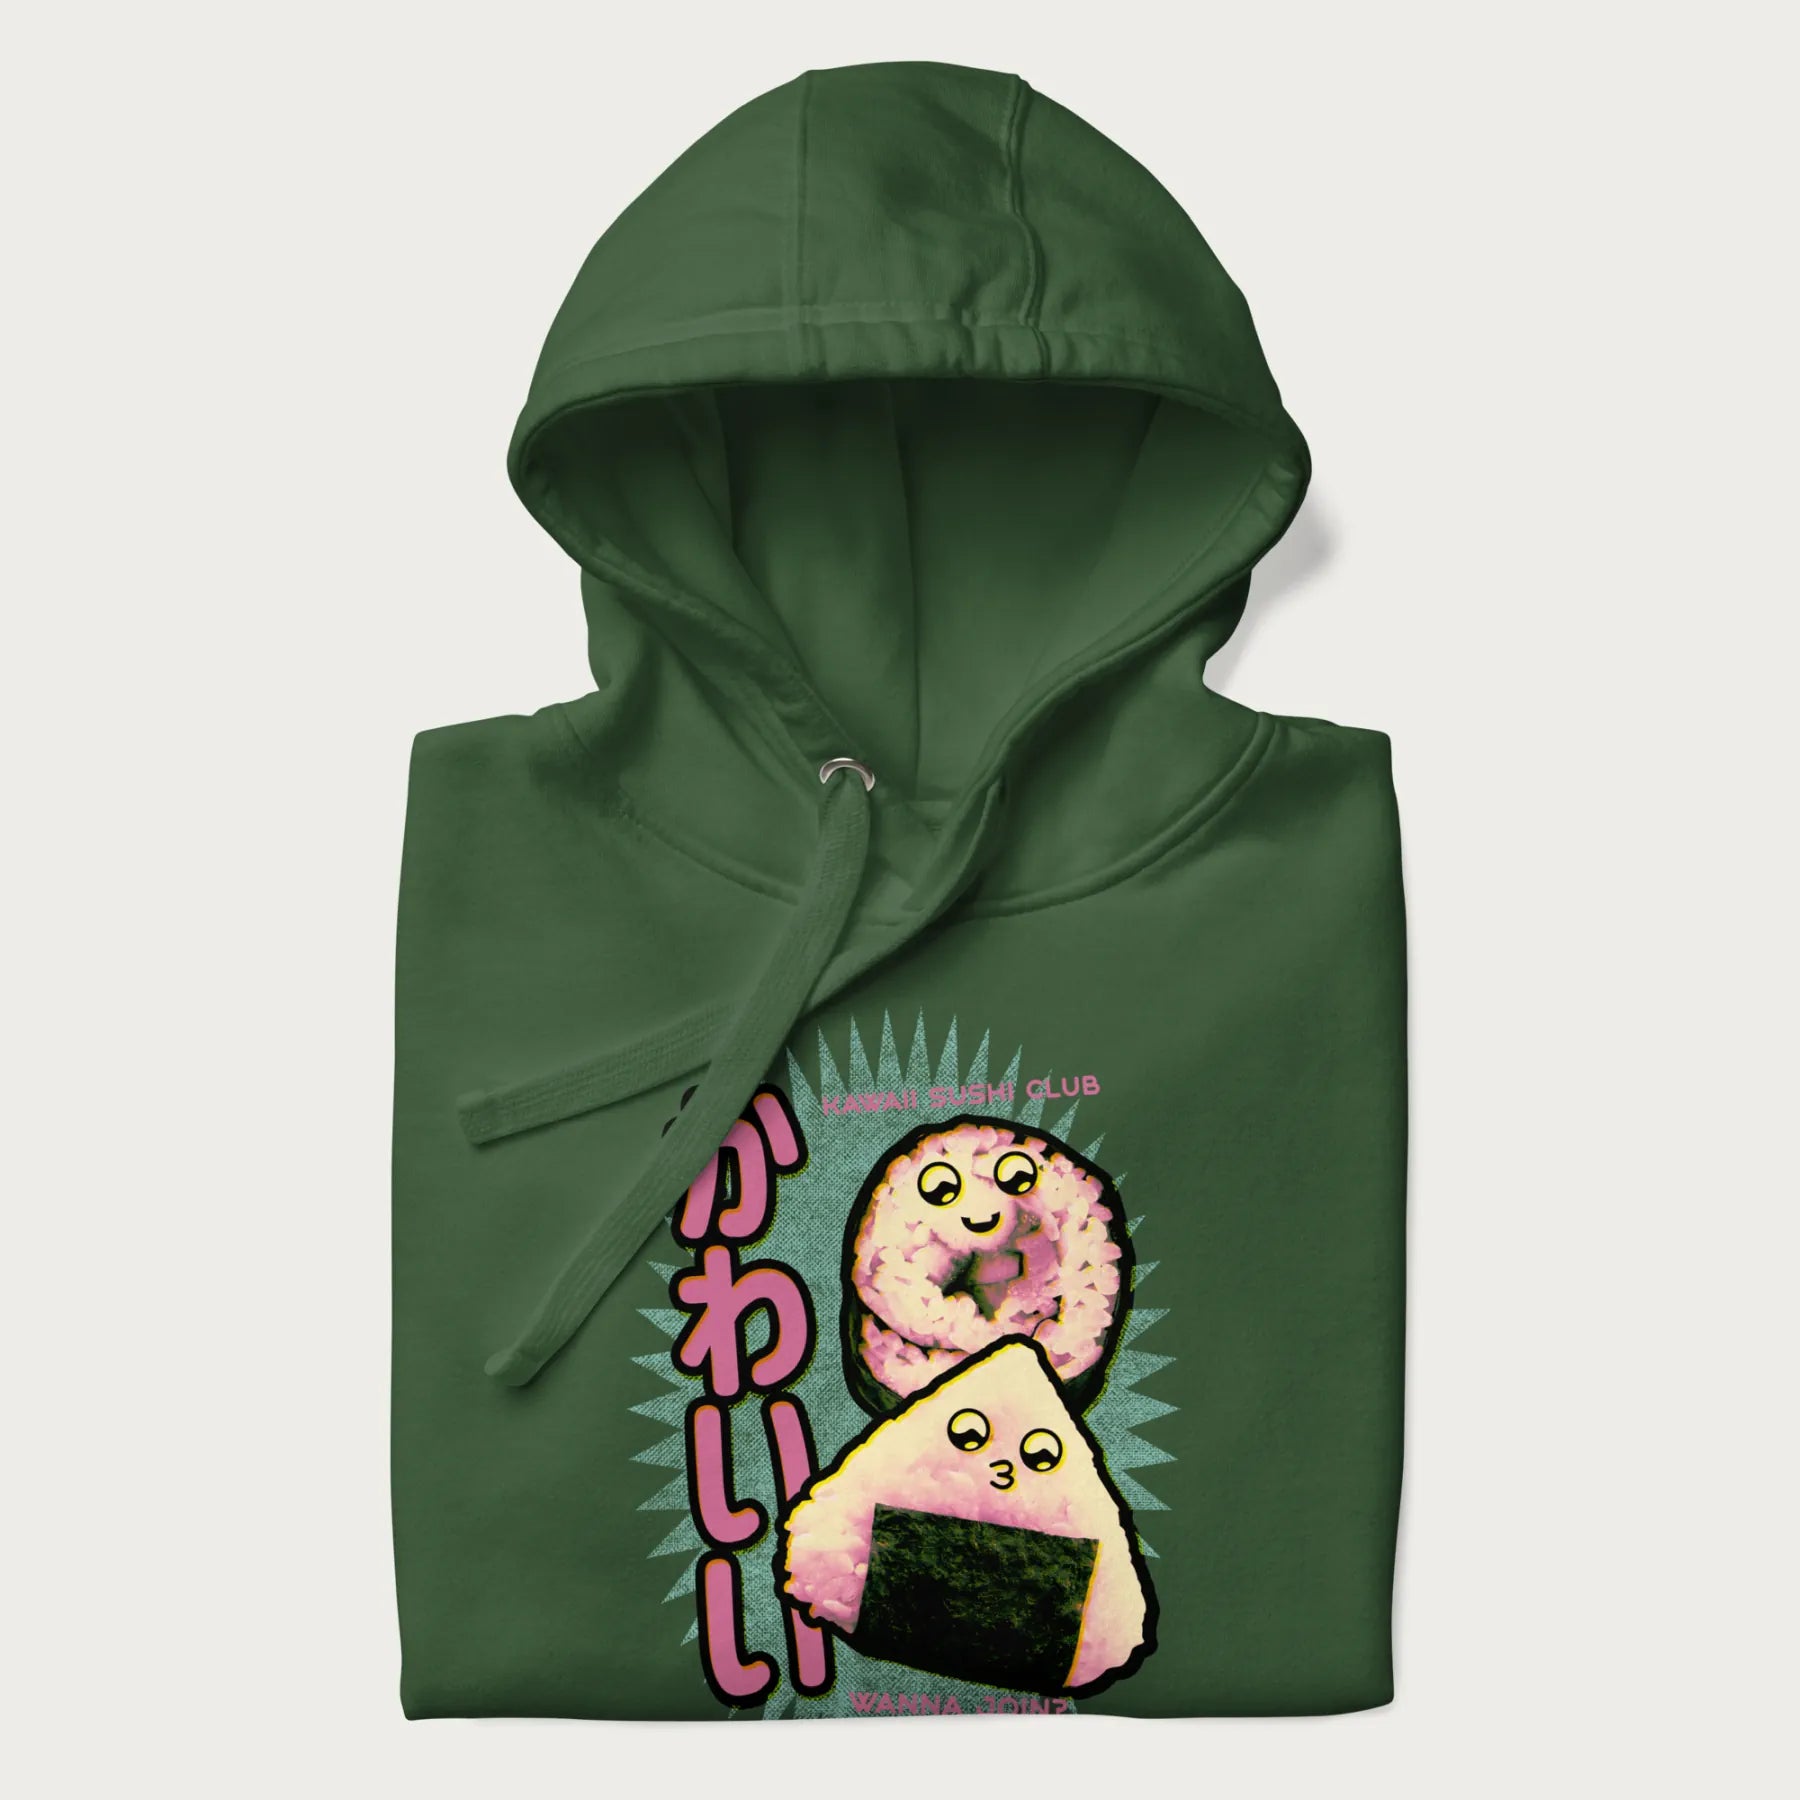 Folded forest green hoodie featuring a cute sushi and onigiri graphic with the text "Kawaii Sushi Club", colorful neon accents and Japanese characters.